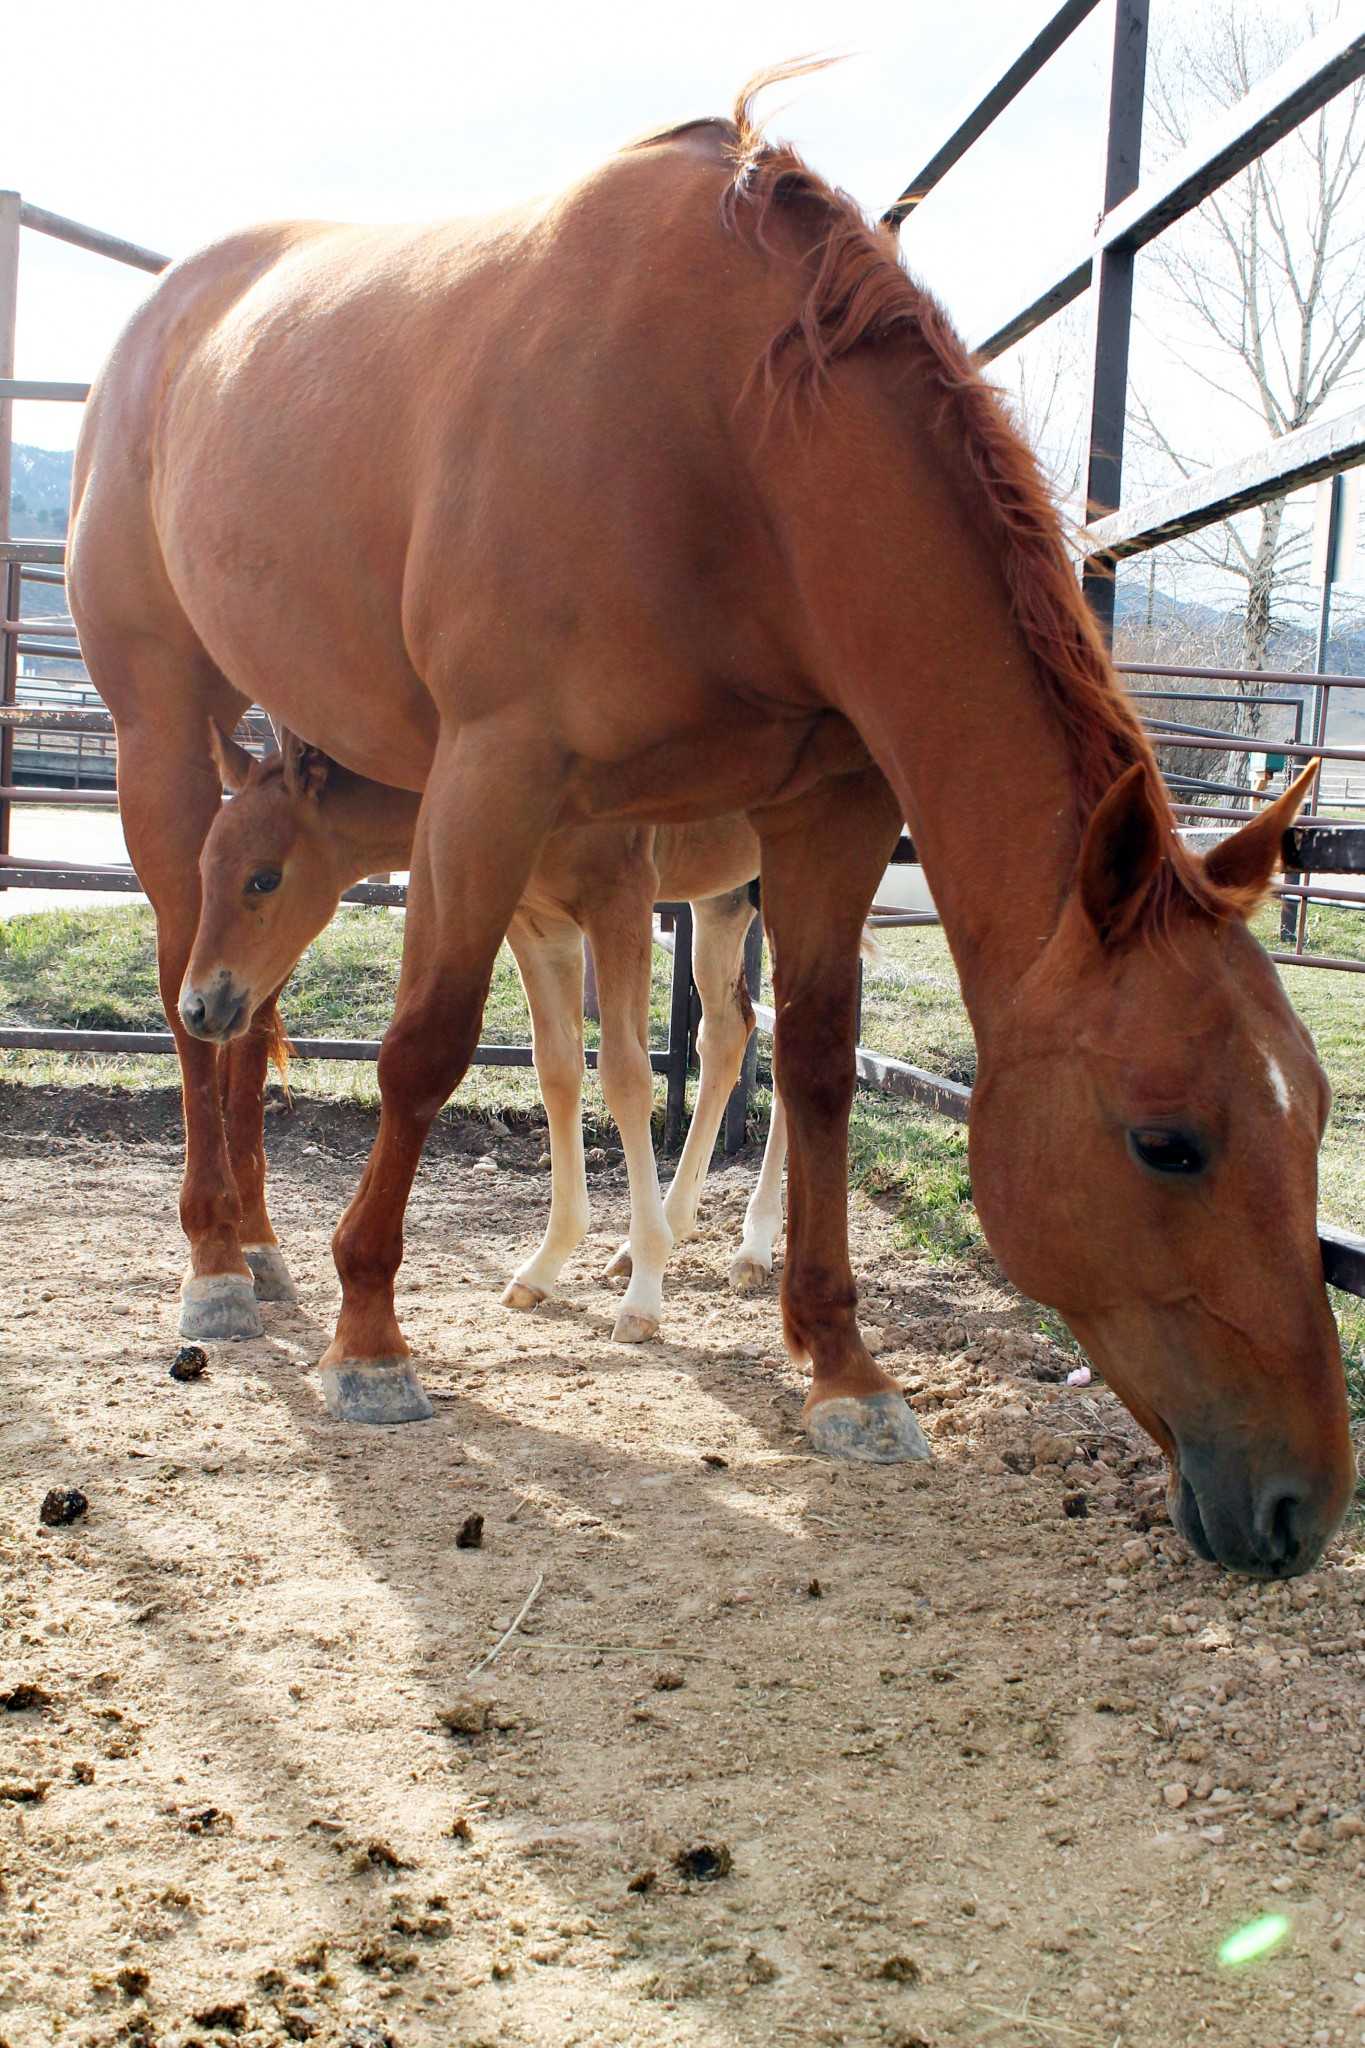 A fourteen-day-old foal peeks out from under its mother after nursing at the CSU Equine Reproduction Center. The reproduction center houses pregnant mares and oversees the birth of baby horses.